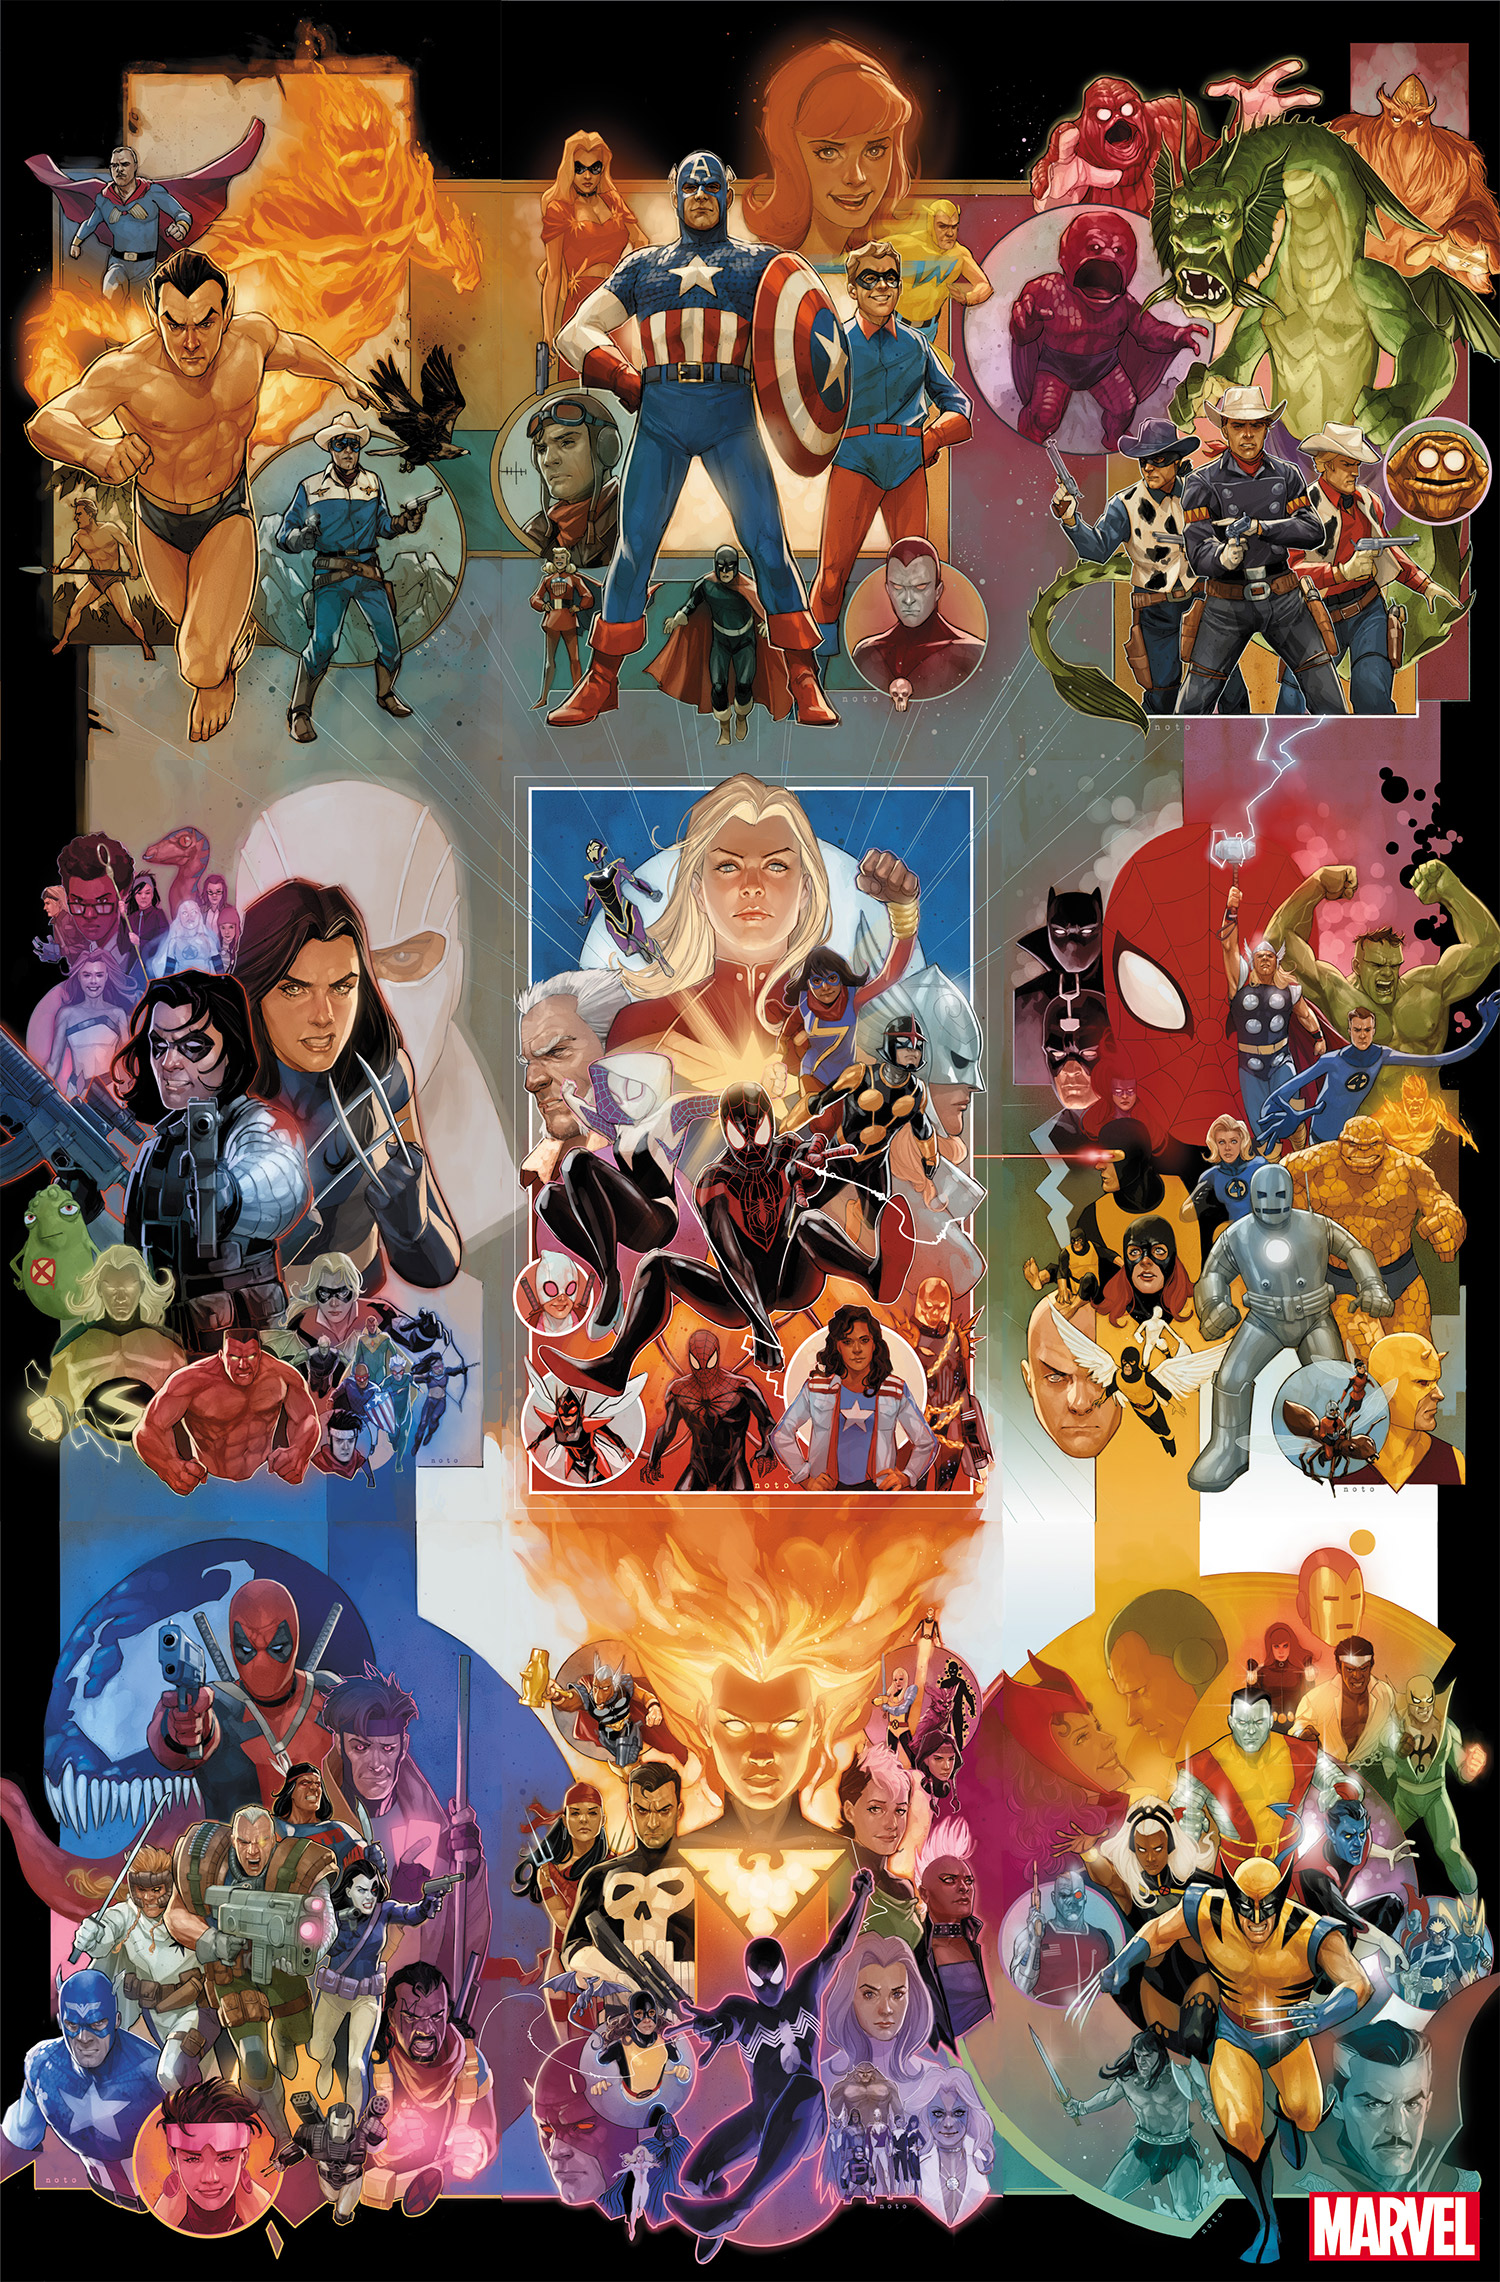 Marvel’s 80th Anniversary variants by Phil Noto